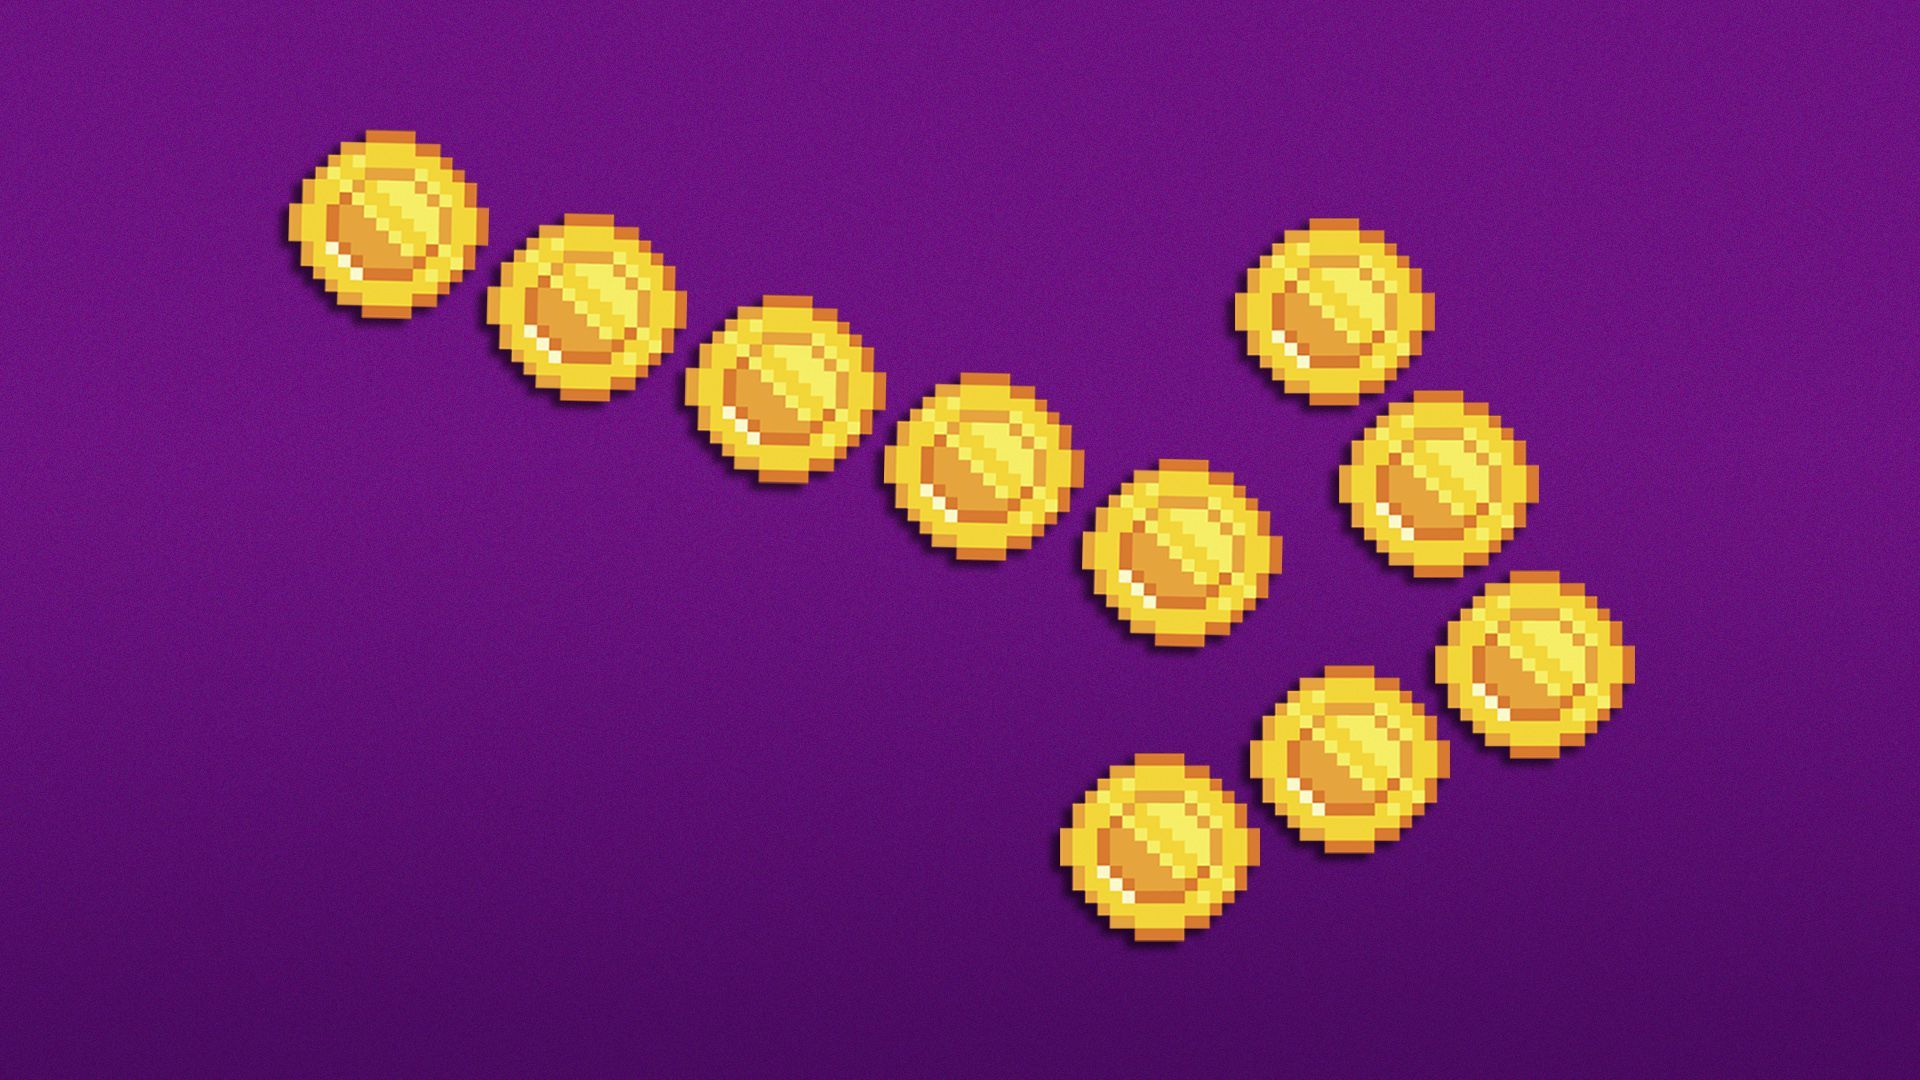 Illustration of pixelated coins in the shape of an arrow pointing down.